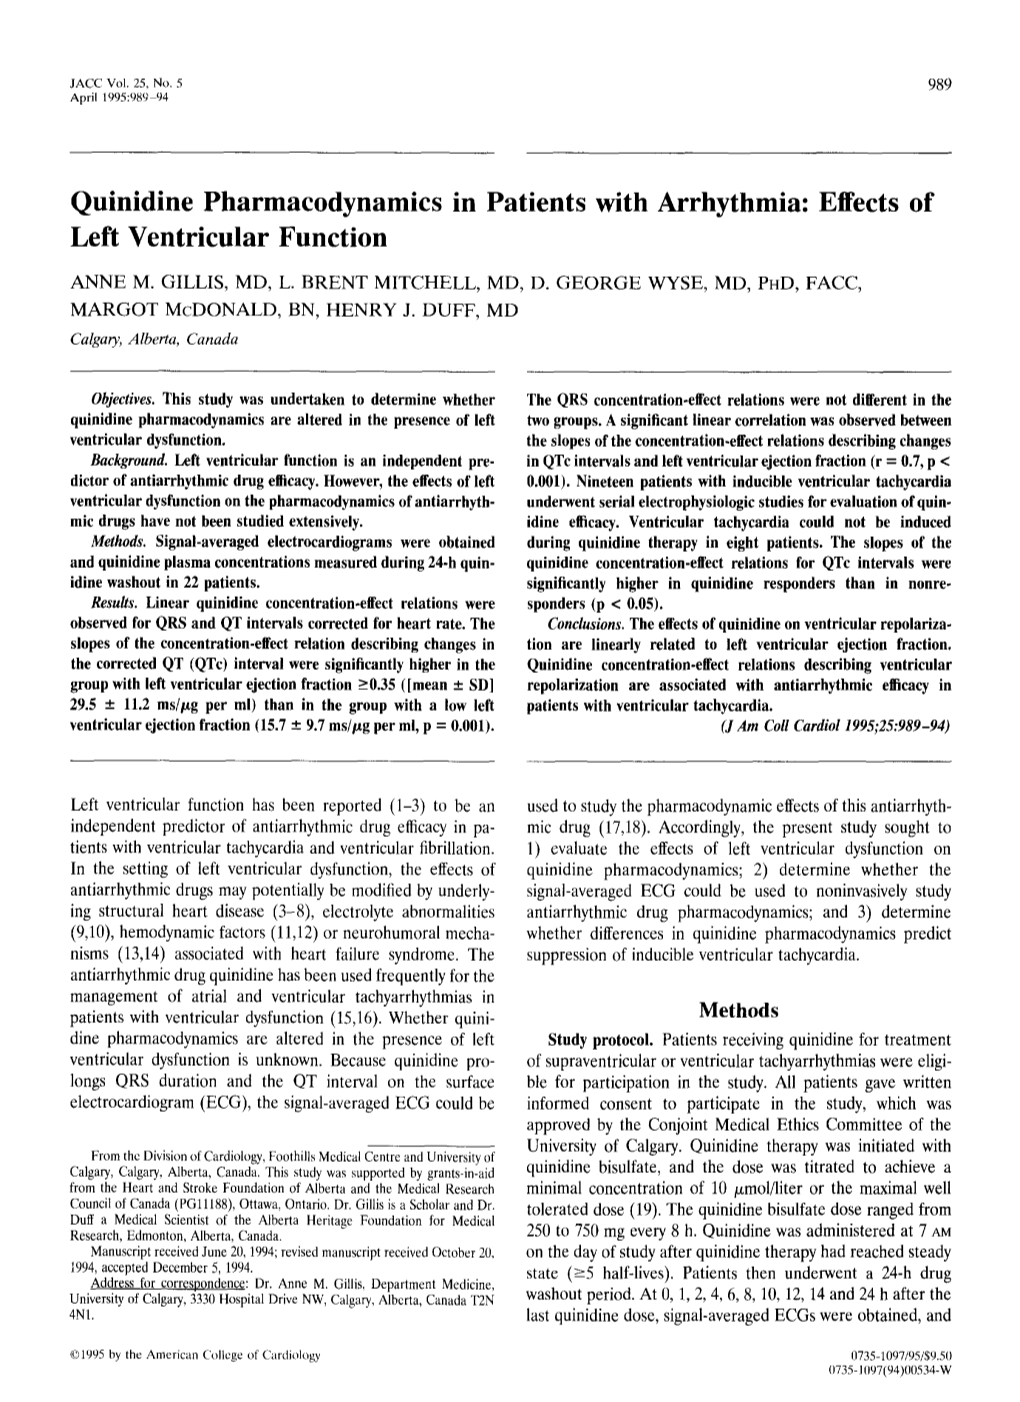 Quinidine Pharmacodynamics in Patients with Arrhythmia: Effects of Left Ventricular Function